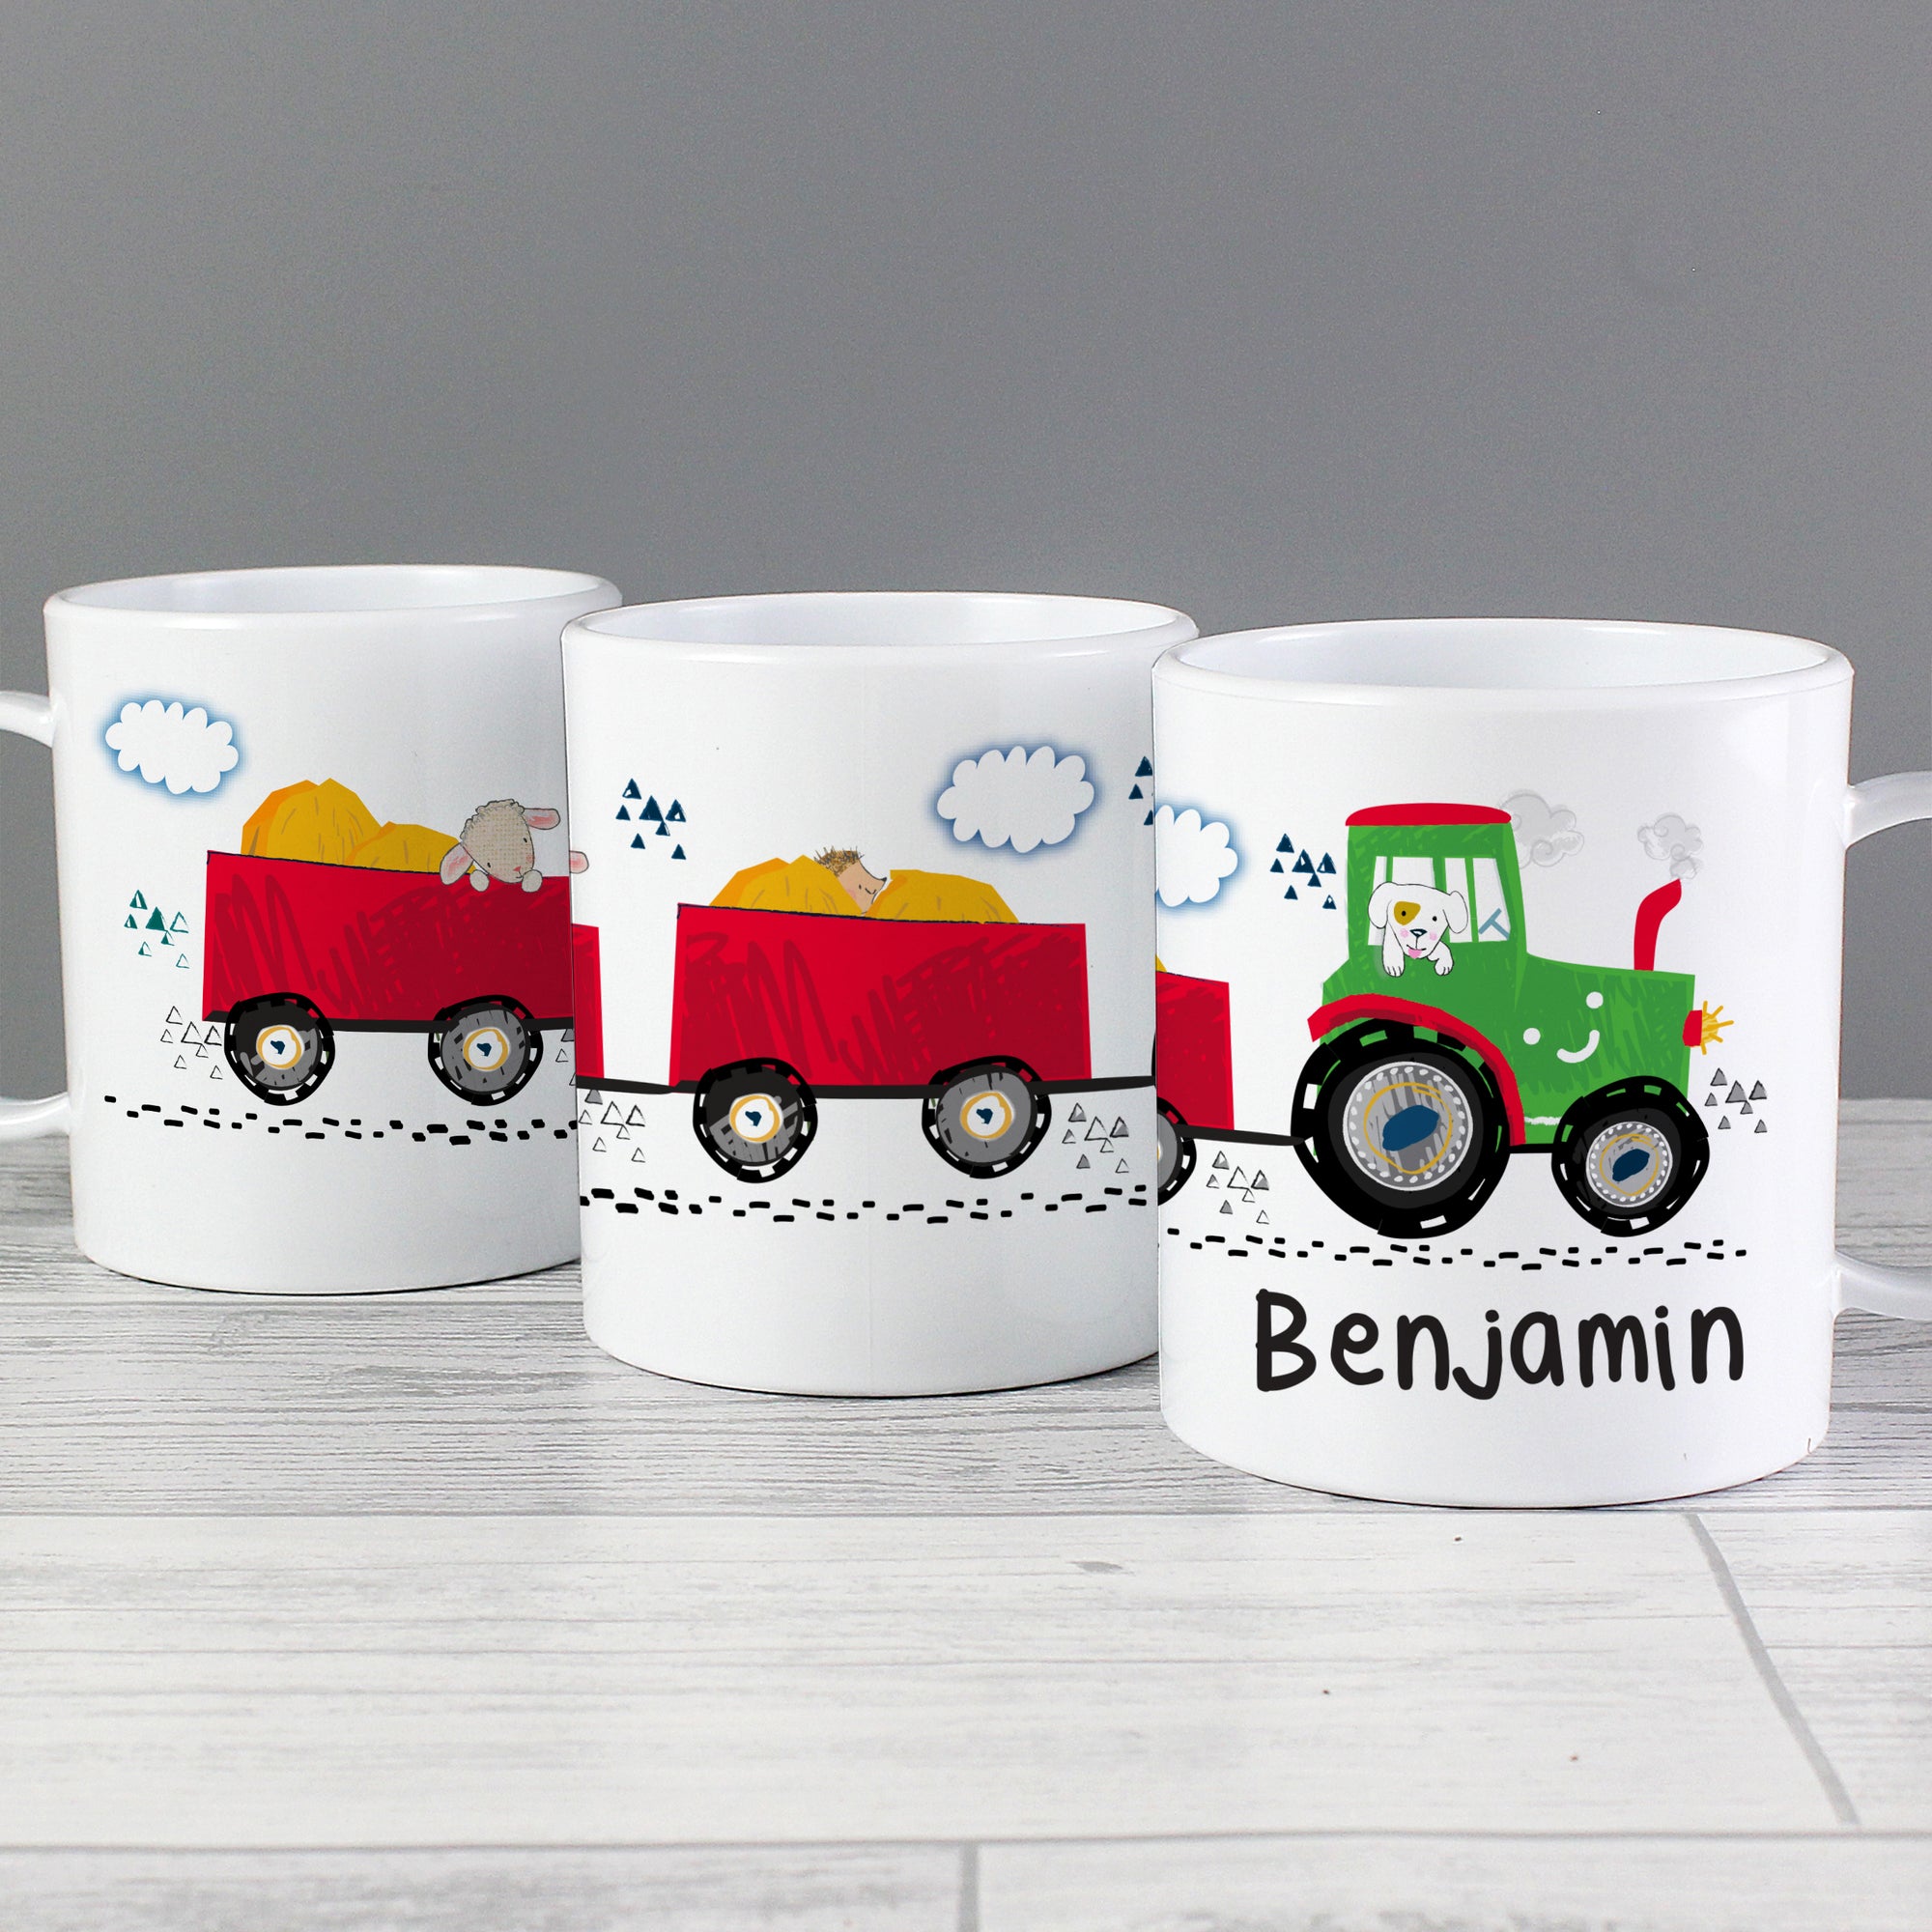 Image of a plastic BPA free childs personalised cup. The cup is white and has an image of a fun cartoon green tractor with a dog in the cab. The tractor is pulling two red trailers that go around at the cup. The cup can be personalised with a name of up to 12 characters which will be printed in black beneath the image of the tractor.